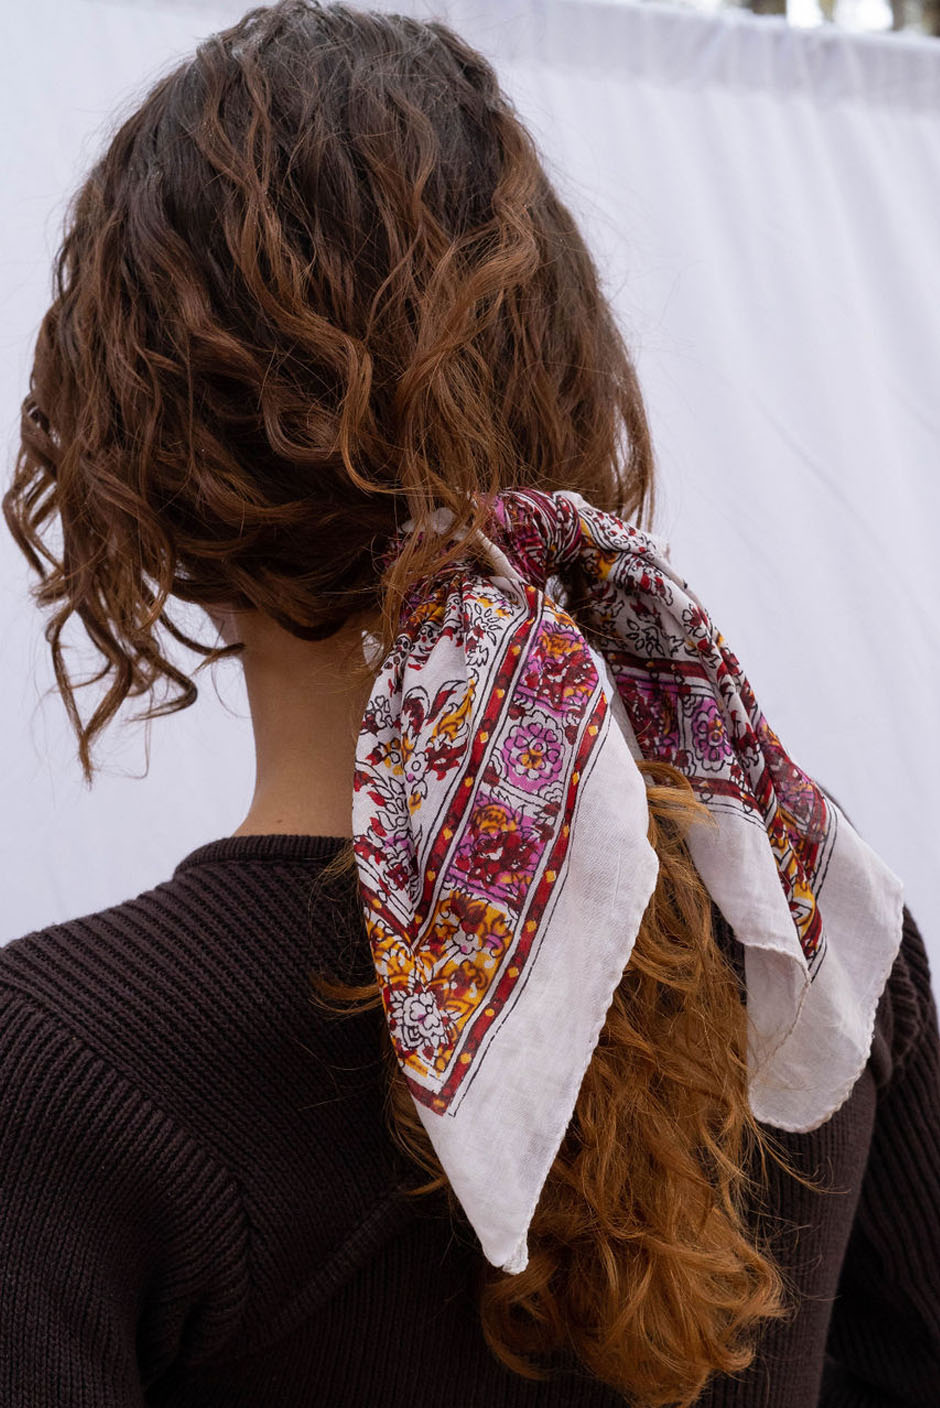 Vintage Freya bandana in White handcrafted in India Featuring a multicolor paisley print for women by Panero Clothing. Hair tied view.